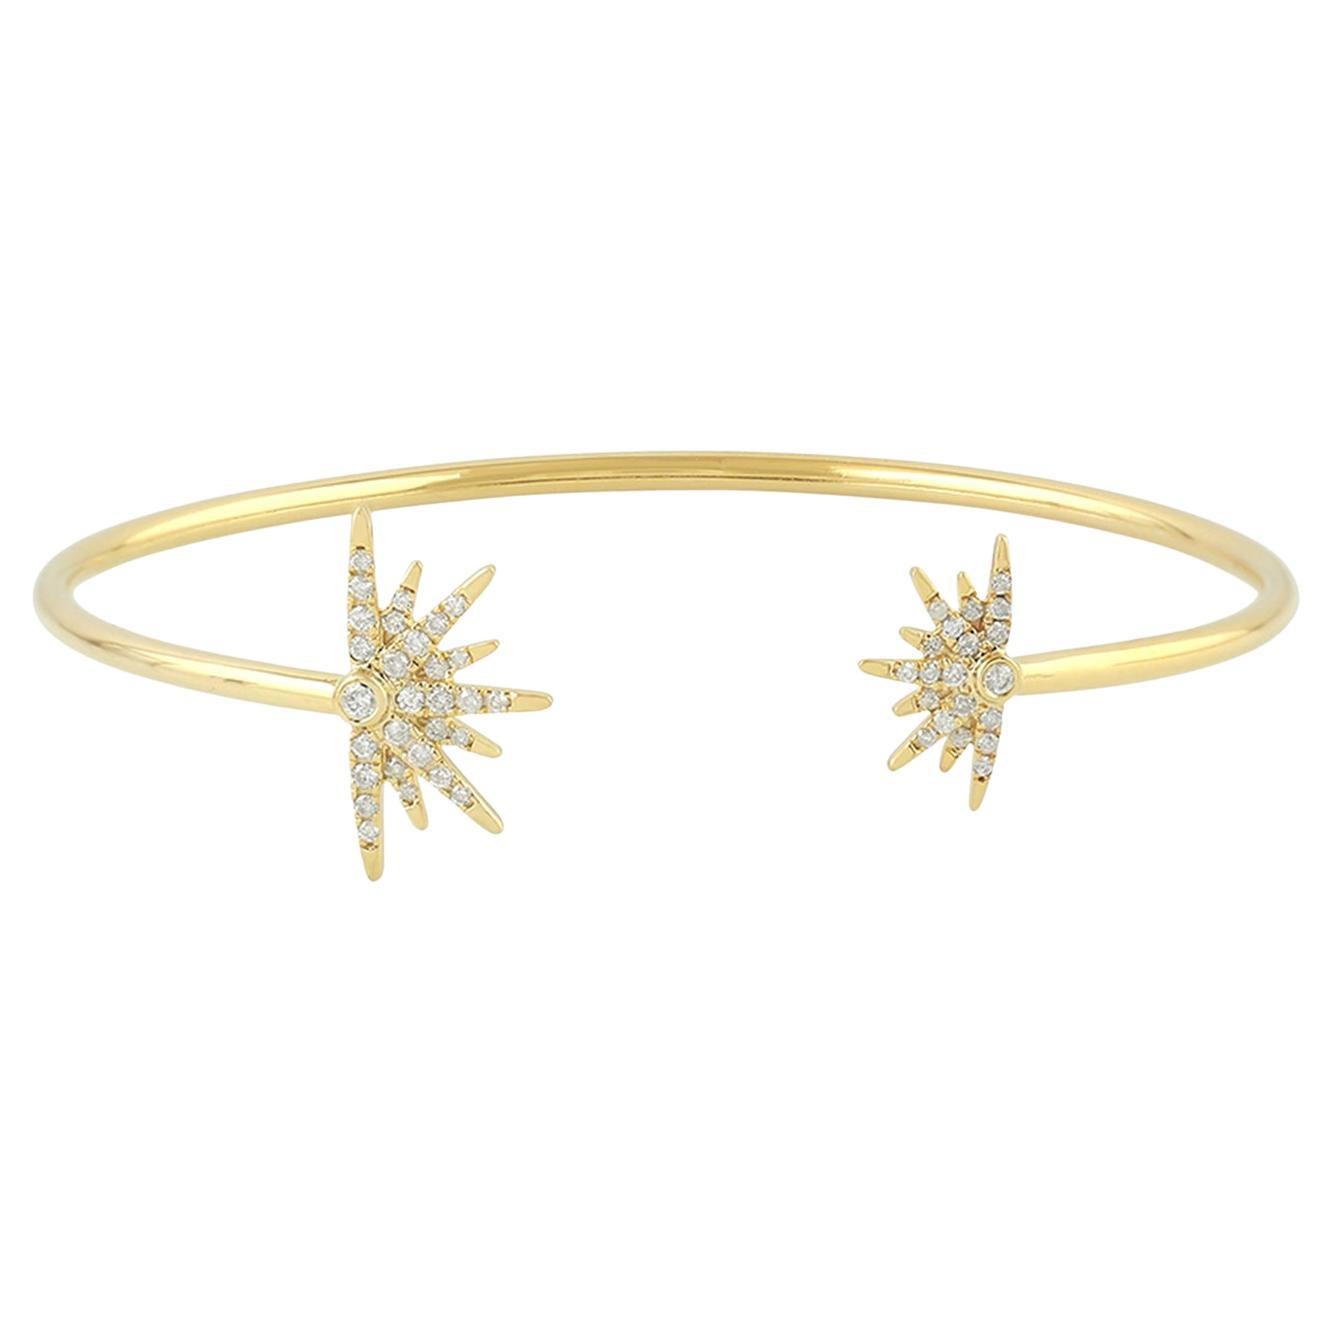 Starburst Pave Diamond Bangle Made In 14k Yellow Gold For Sale